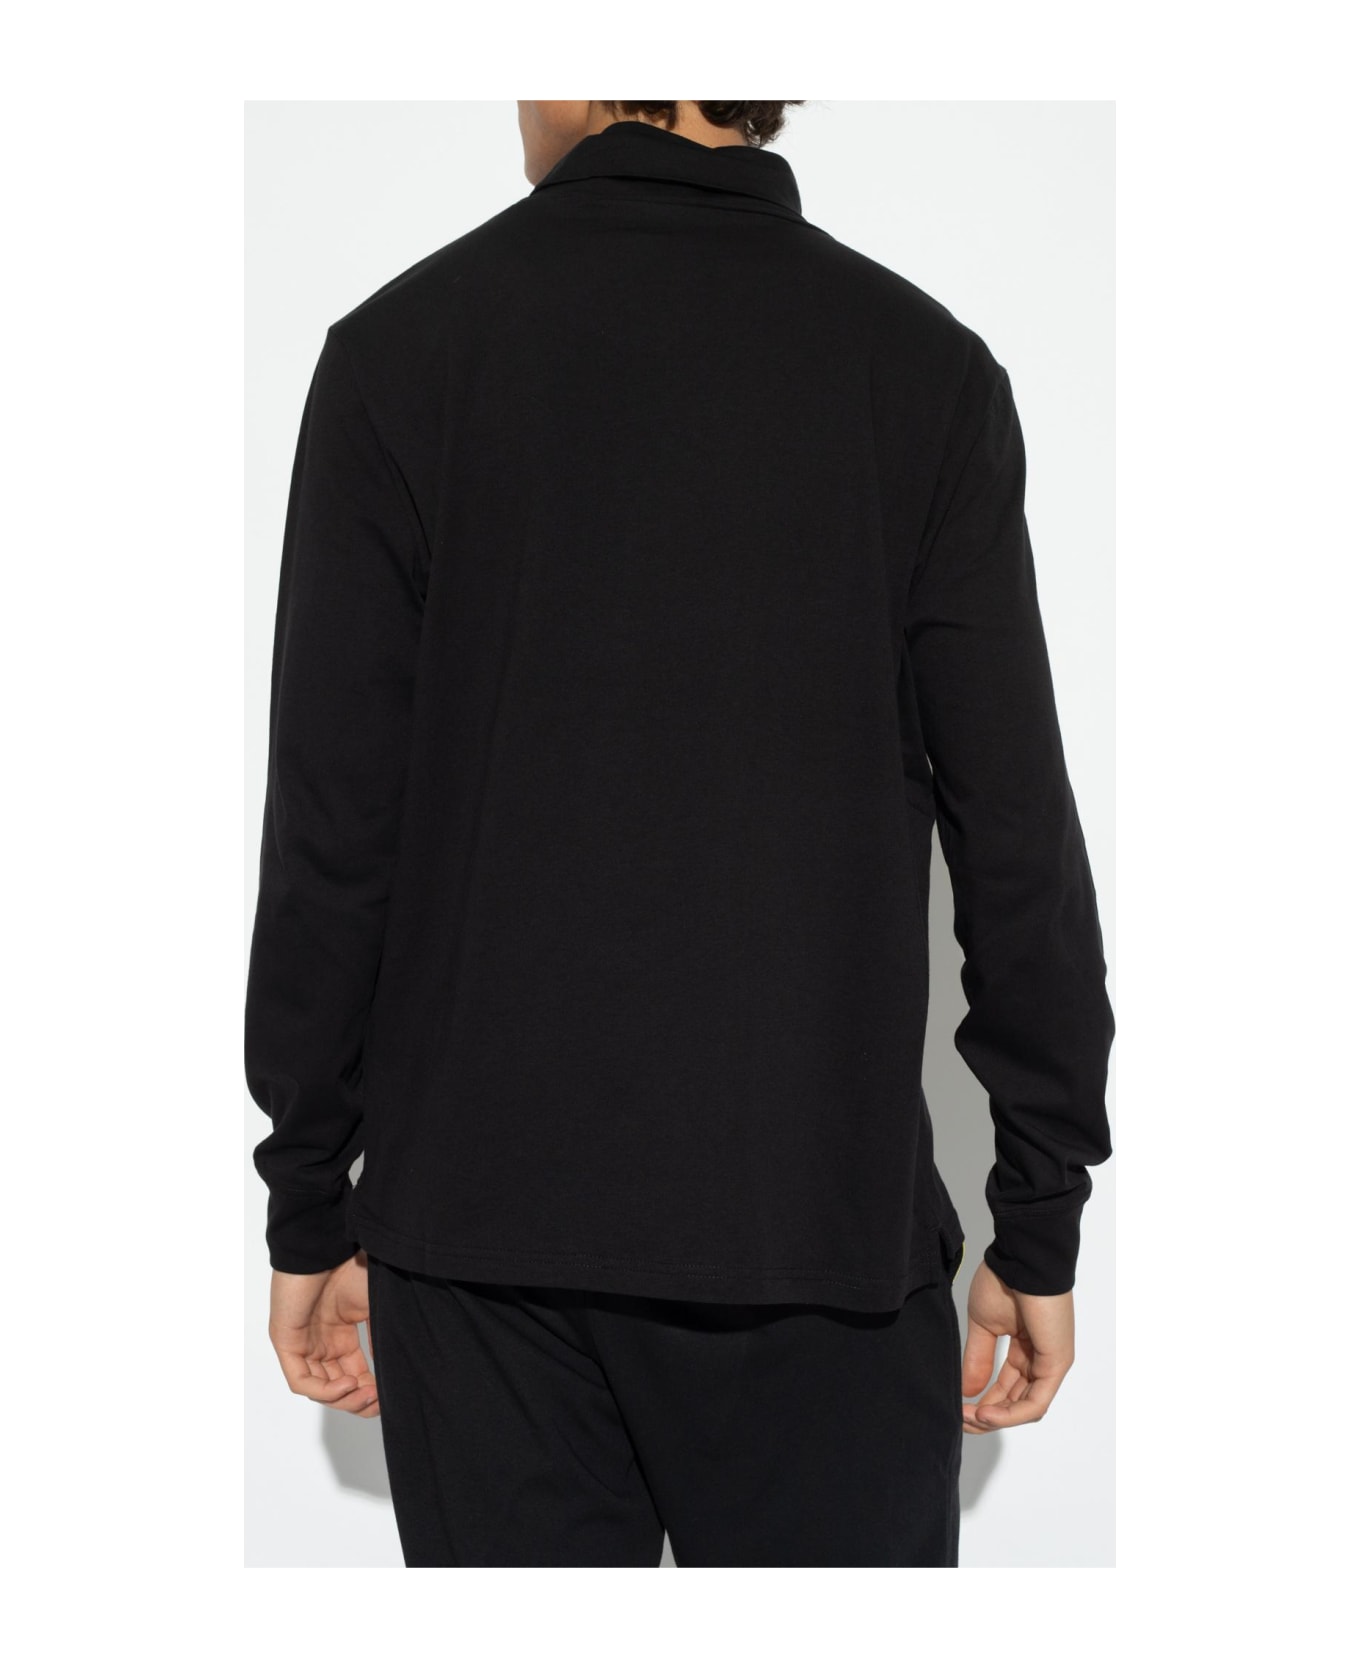 PS by Paul Smith Ps Paul Smith Turtleneck Sweater With Patch - BLACK ニットウェア